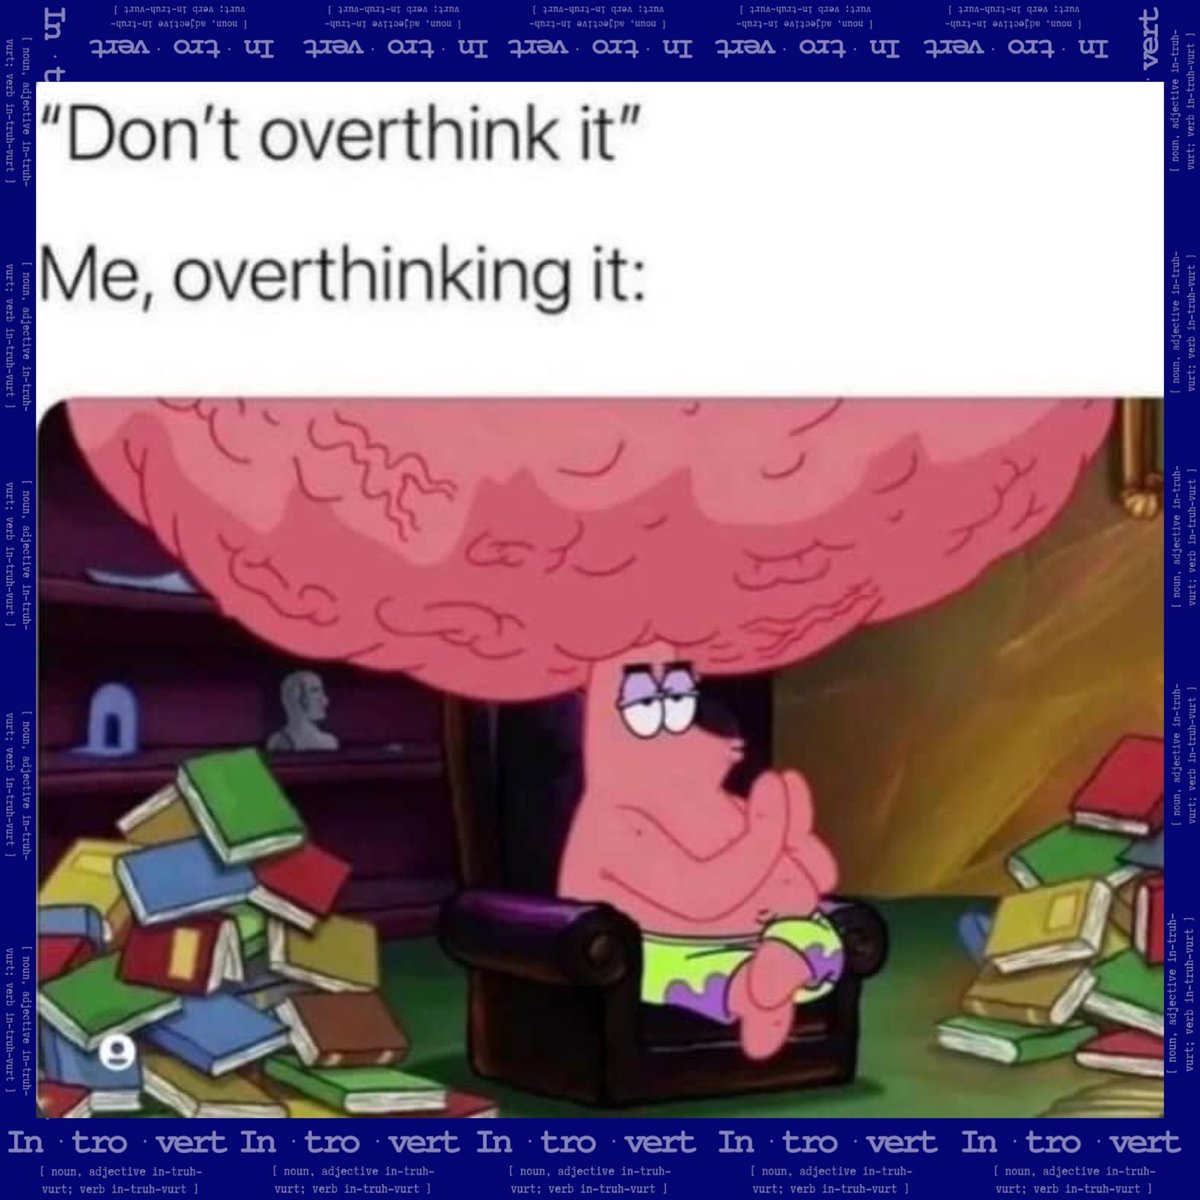 Don'tr tell me to not overthink it because that's exactly what I'll do!!

#introvert #anintrovertsjourney #dontoverthinkit #meoverthinking